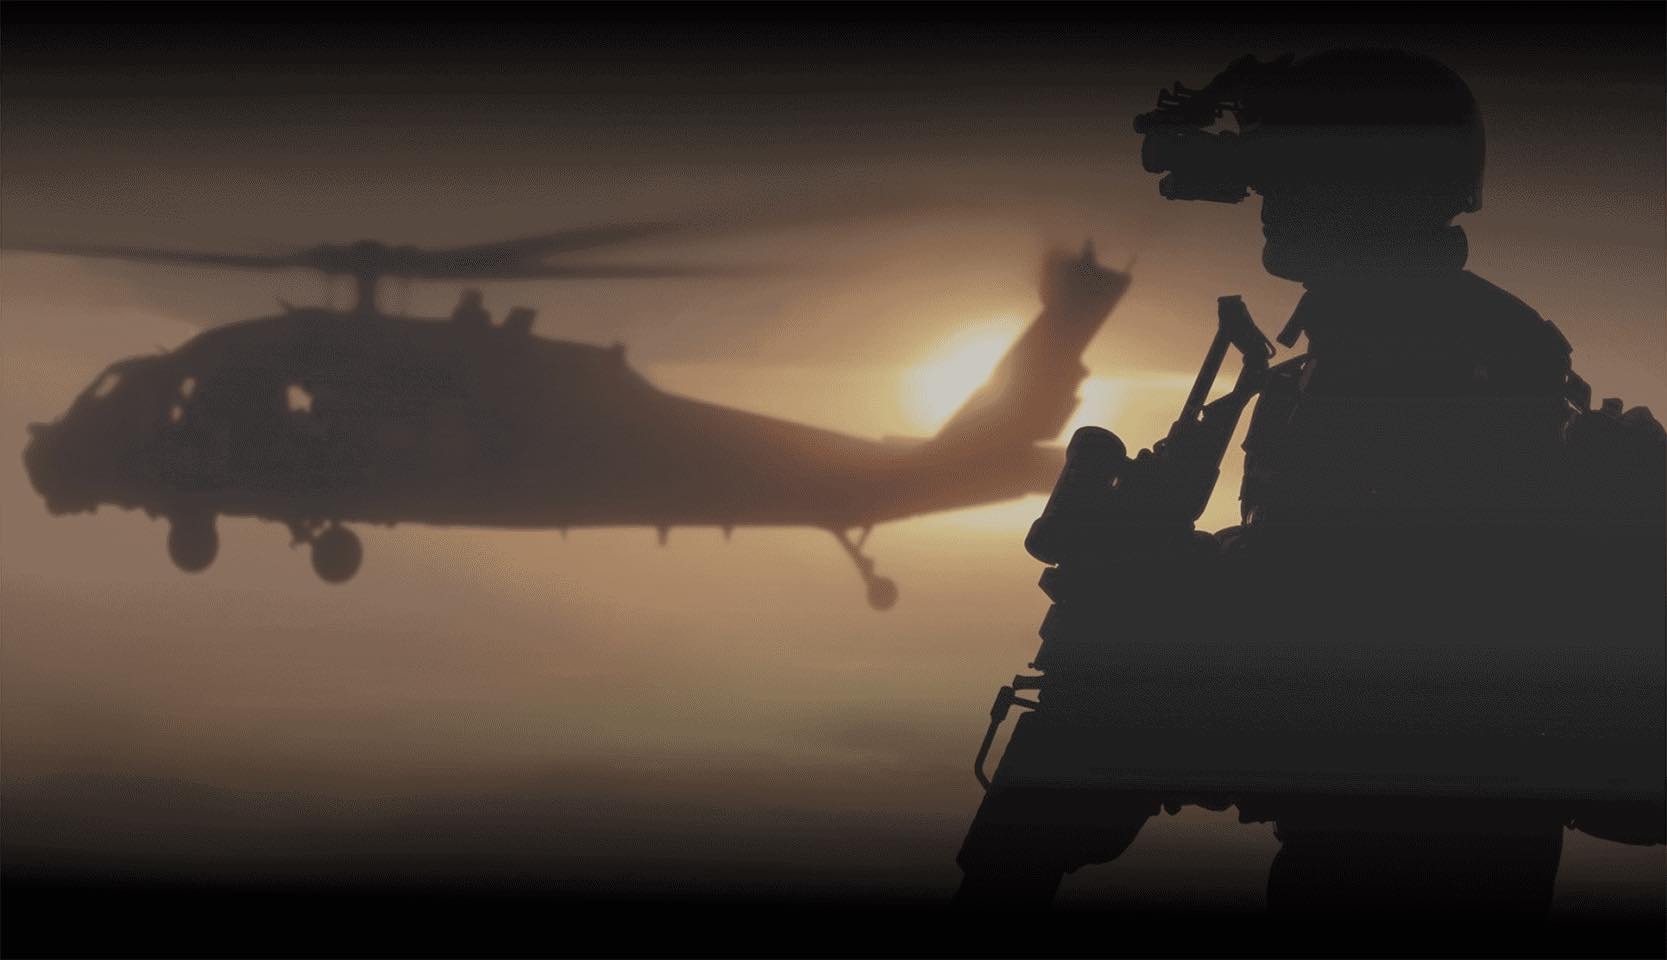 Navy Seal shadow and helicopter in background